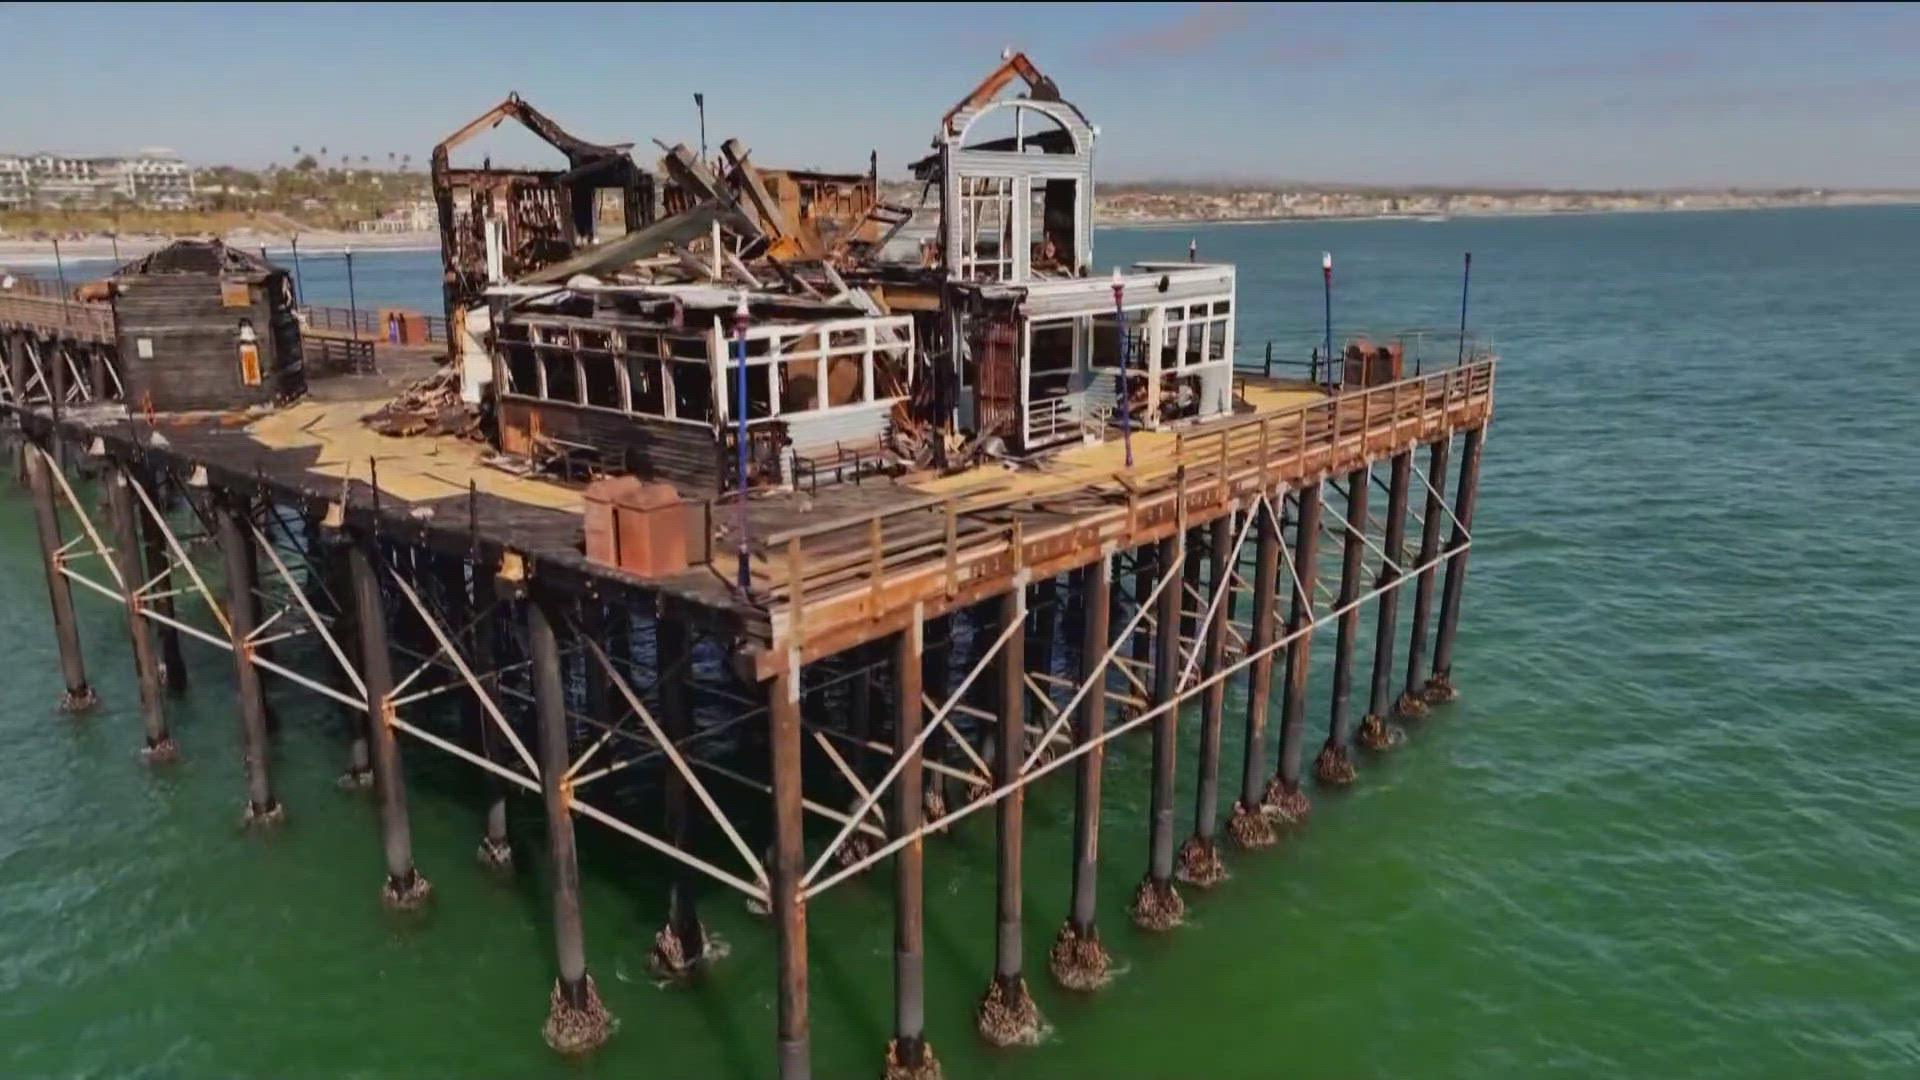 San Diego County community members are devastated over the iconic pier's damage.